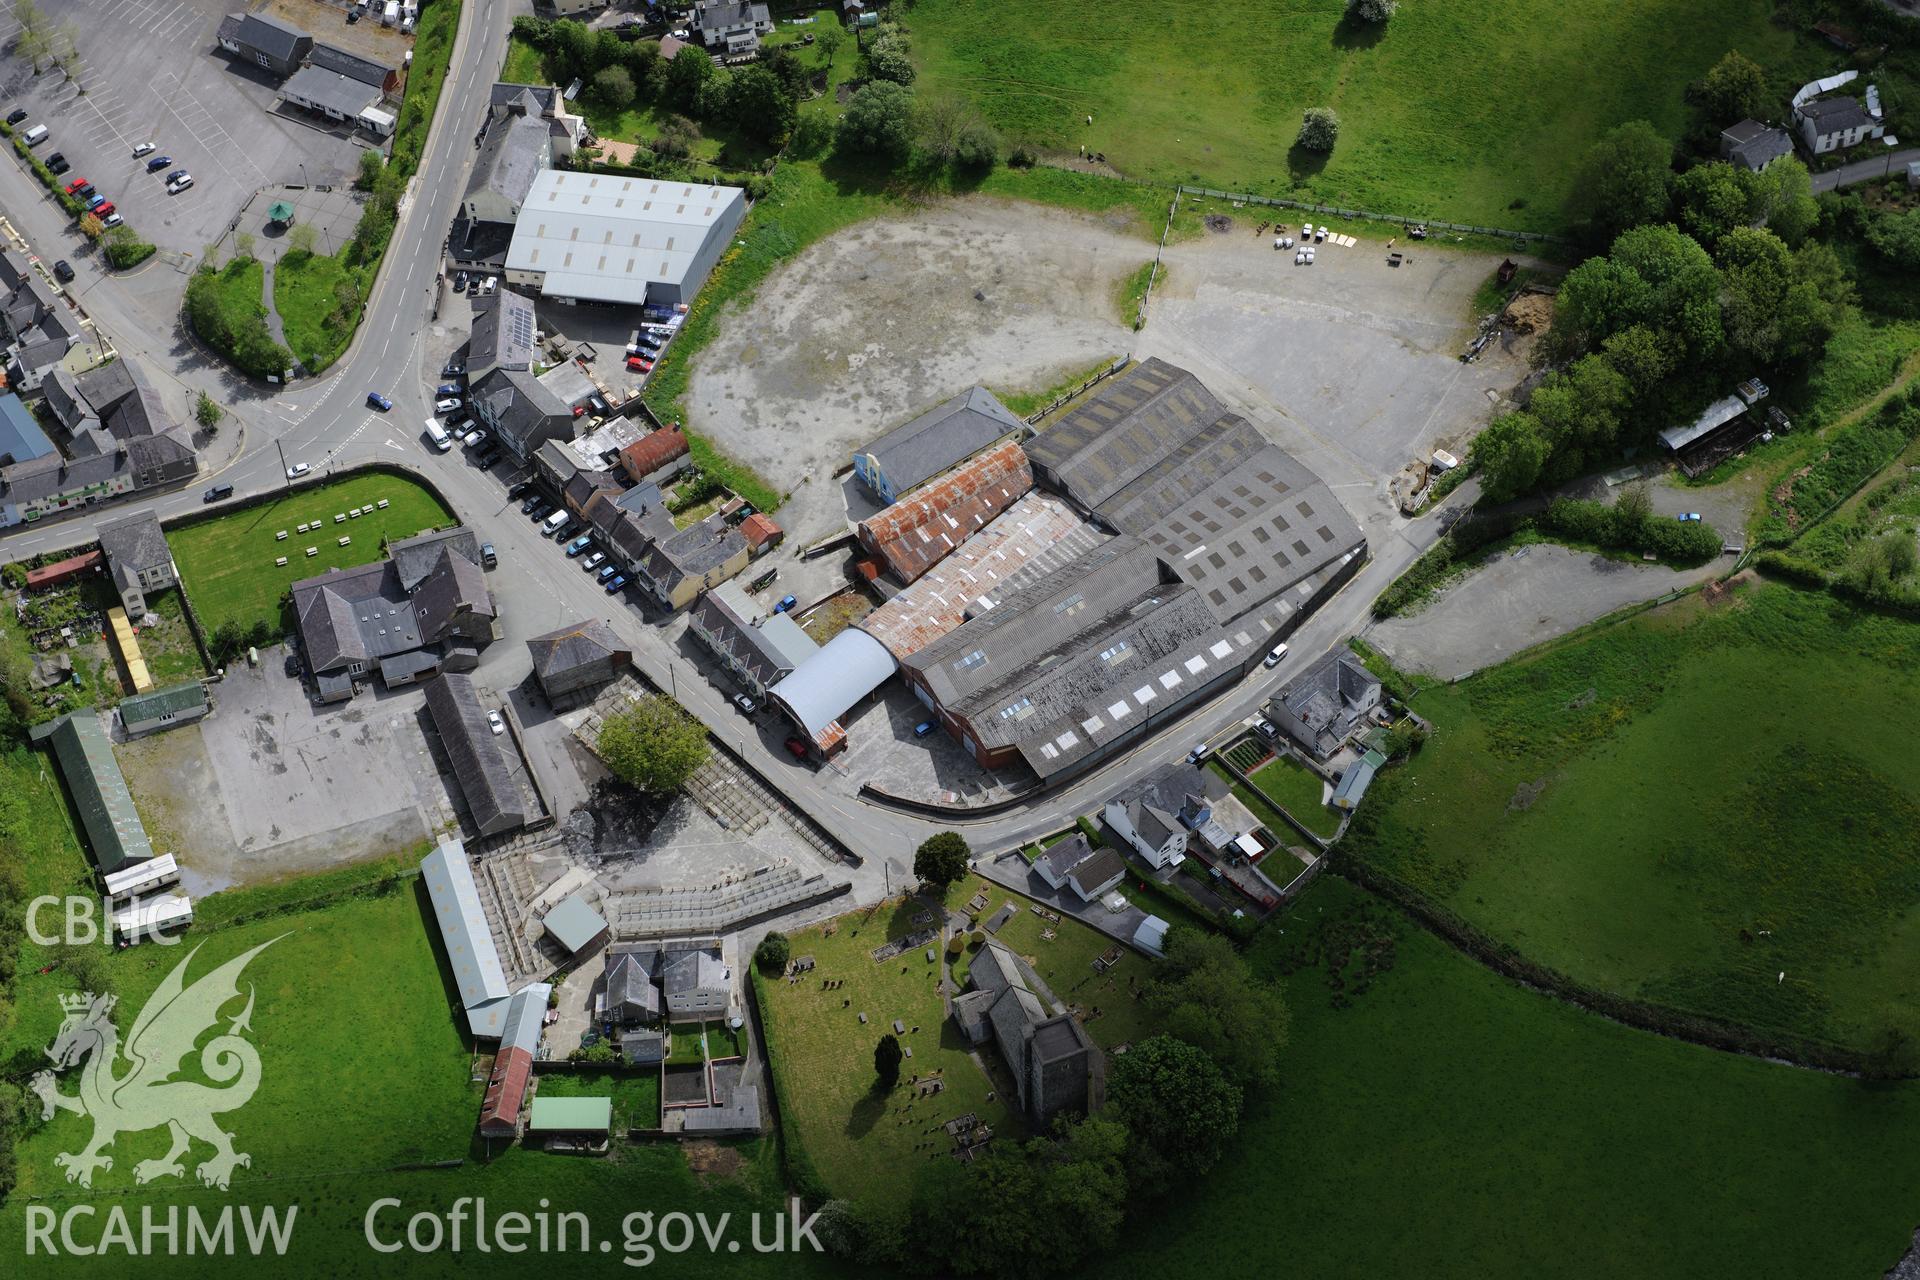 St. Peter's Church and Llanybydder Livestock Market at Llanybydder. Oblique aerial photograph taken during the Royal Commission's programme of archaeological aerial reconnaissance by Toby Driver on 3rd June 2015.